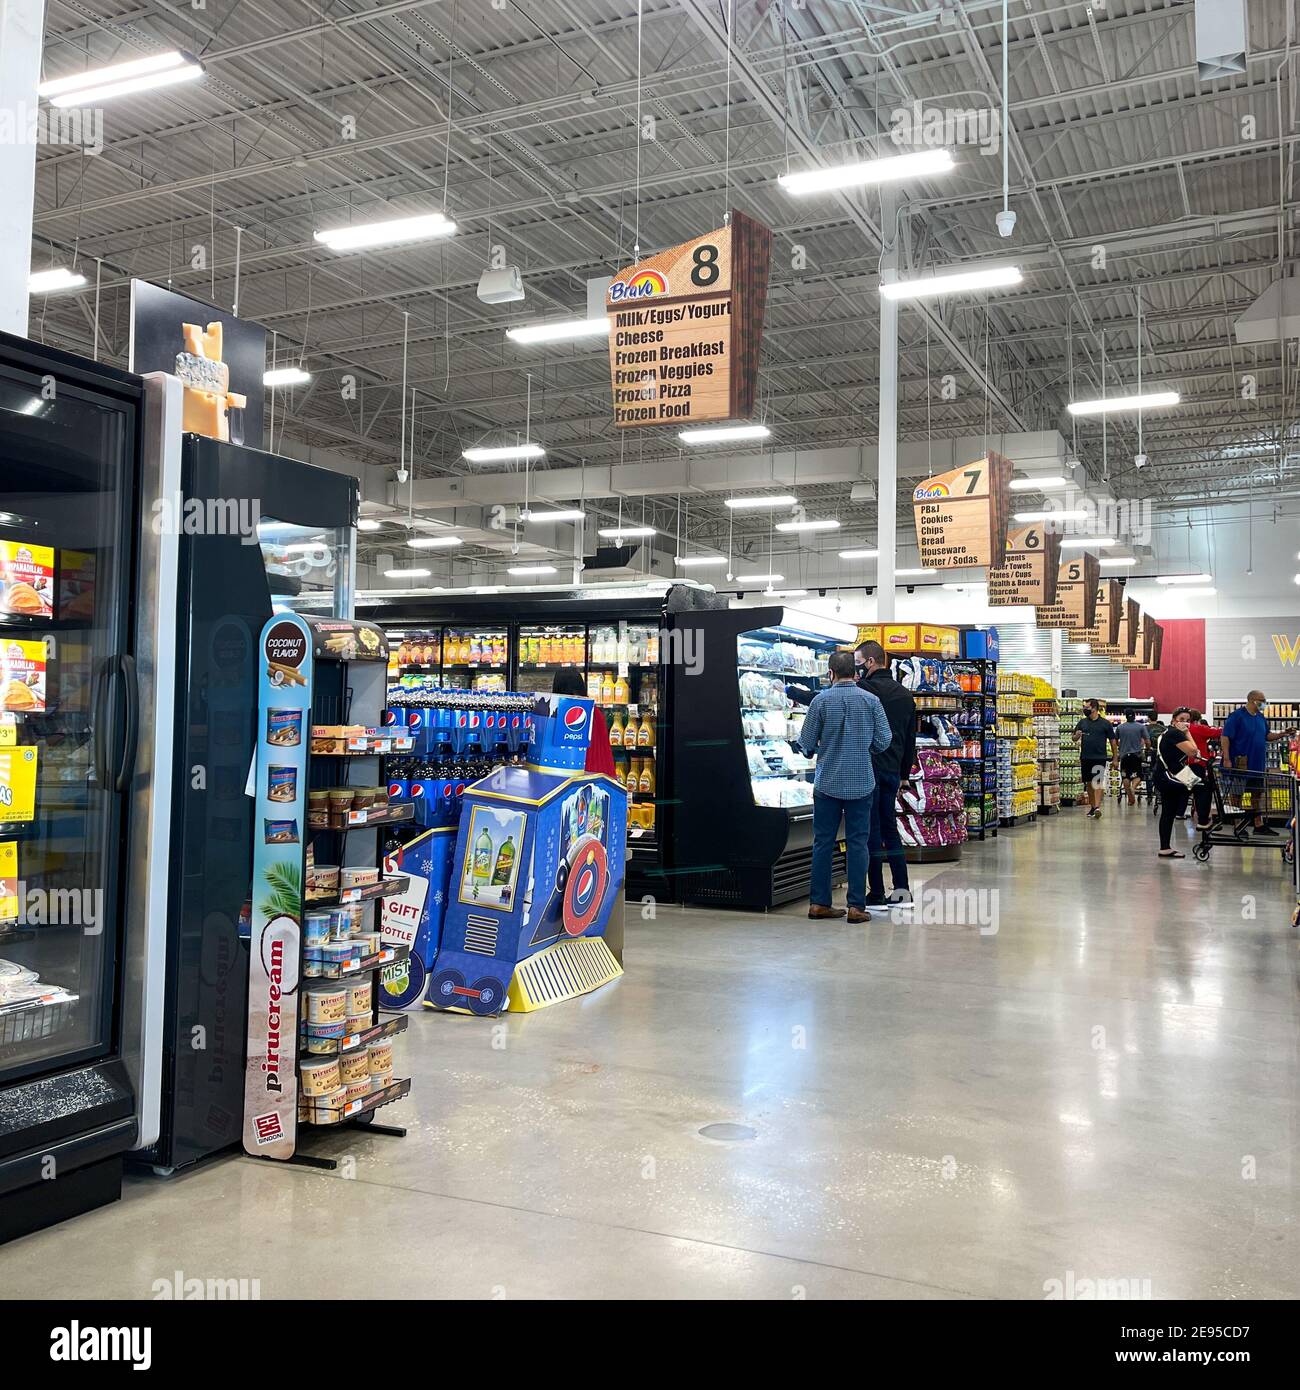 Orlando, FL USA - December 27, 2020: An overview of multiple aisles of a Bravo Market grocery store in Orlando, Florida. Stock Photo